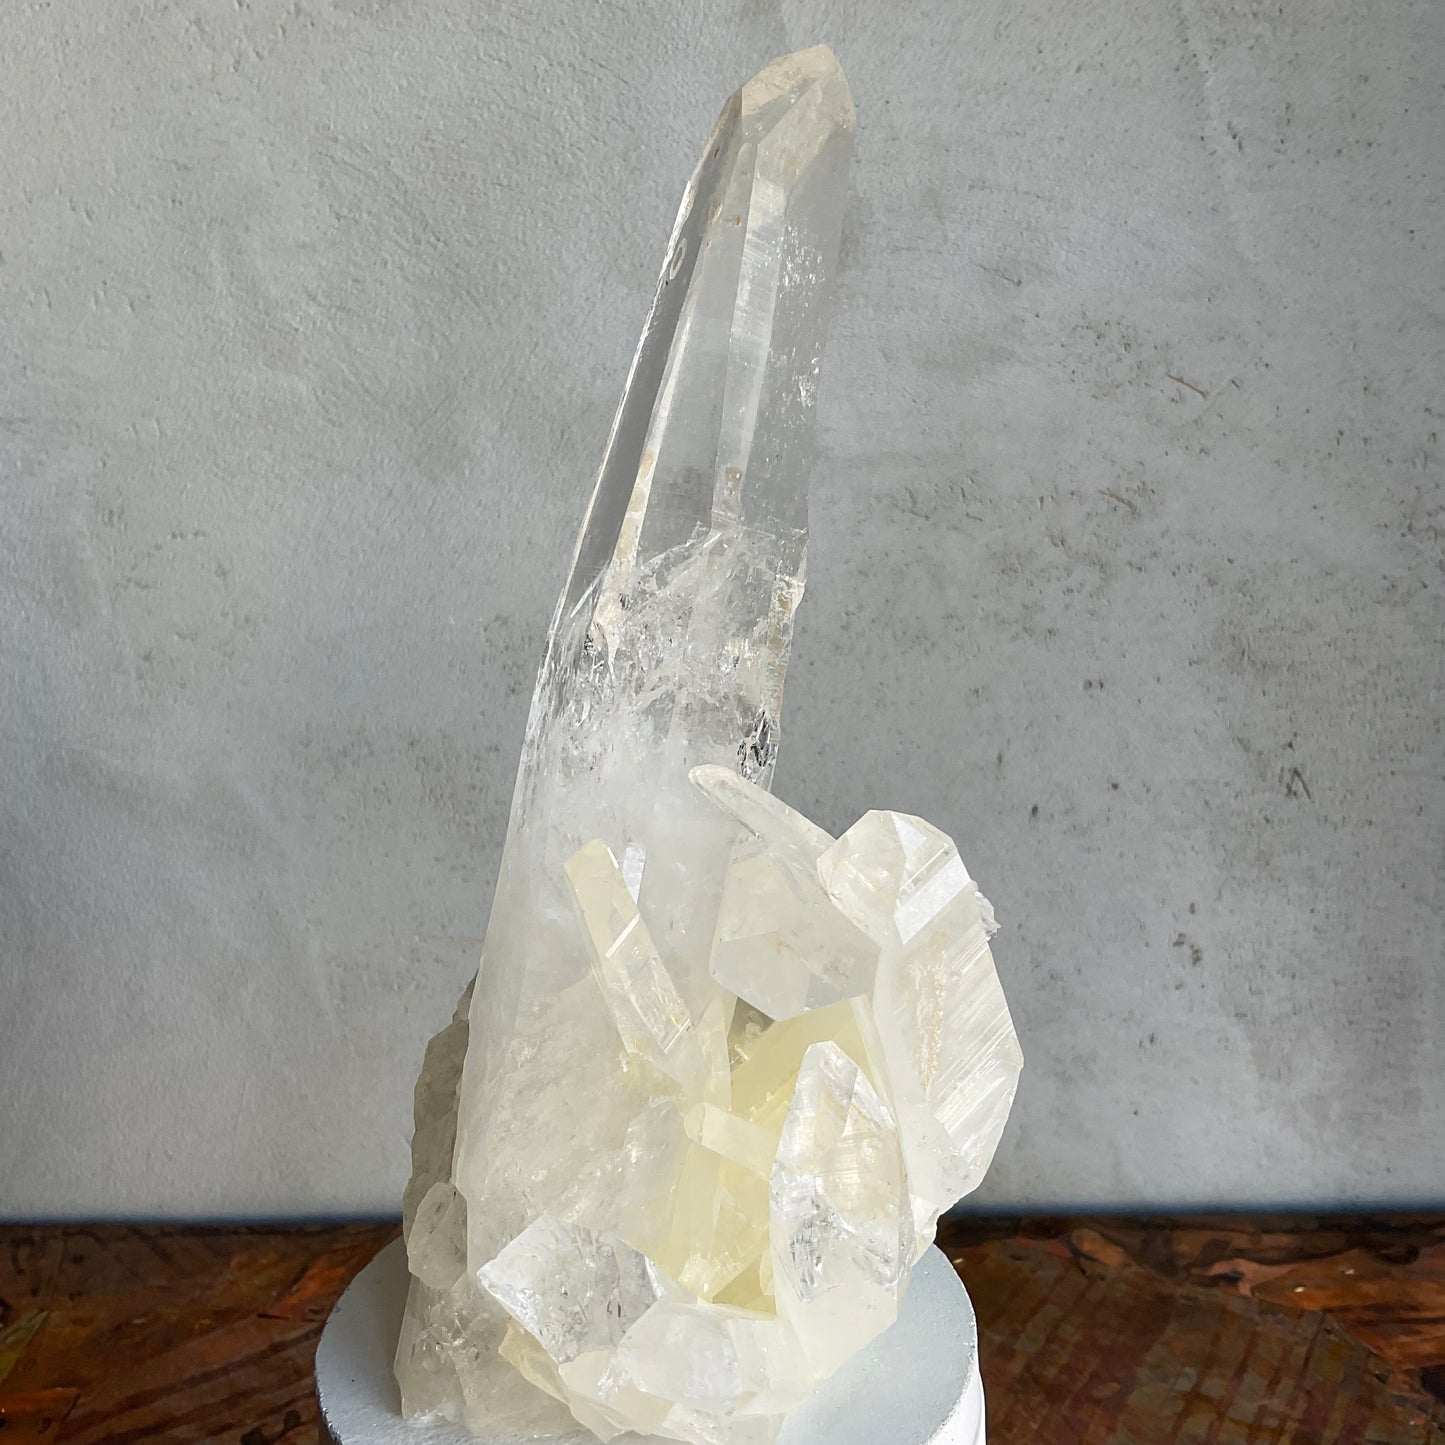 Tall Quartz Generator in Cluster Lid Candle